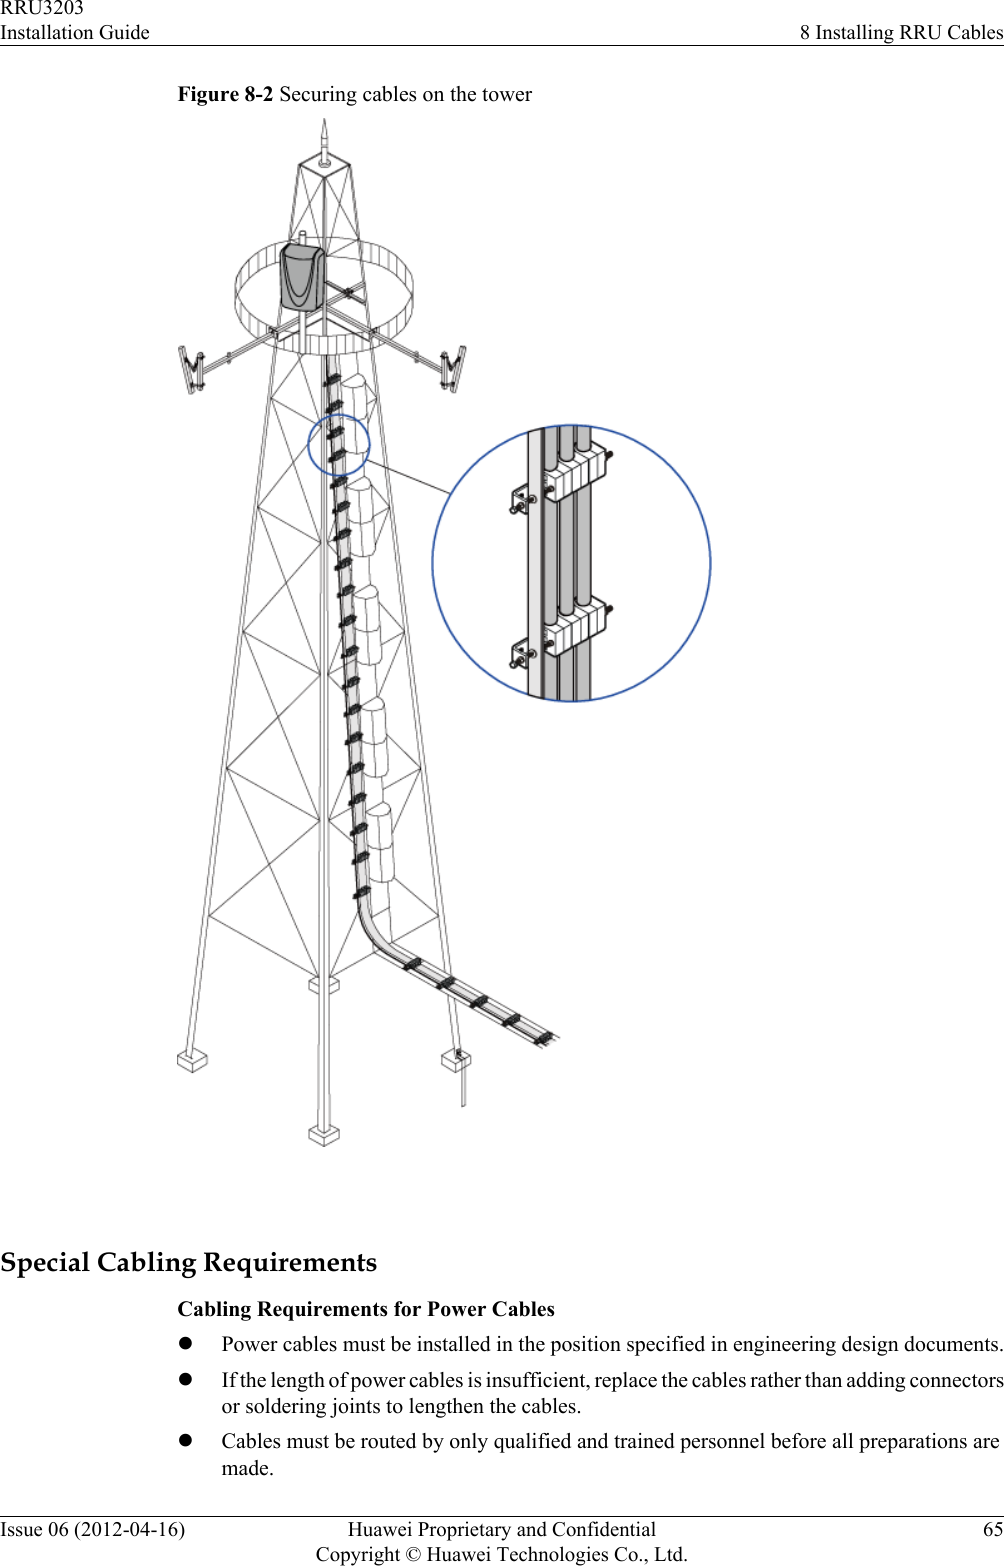 Figure 8-2 Securing cables on the tower Special Cabling RequirementsCabling Requirements for Power CableslPower cables must be installed in the position specified in engineering design documents.lIf the length of power cables is insufficient, replace the cables rather than adding connectorsor soldering joints to lengthen the cables.lCables must be routed by only qualified and trained personnel before all preparations aremade.RRU3203Installation Guide 8 Installing RRU CablesIssue 06 (2012-04-16) Huawei Proprietary and ConfidentialCopyright © Huawei Technologies Co., Ltd.65